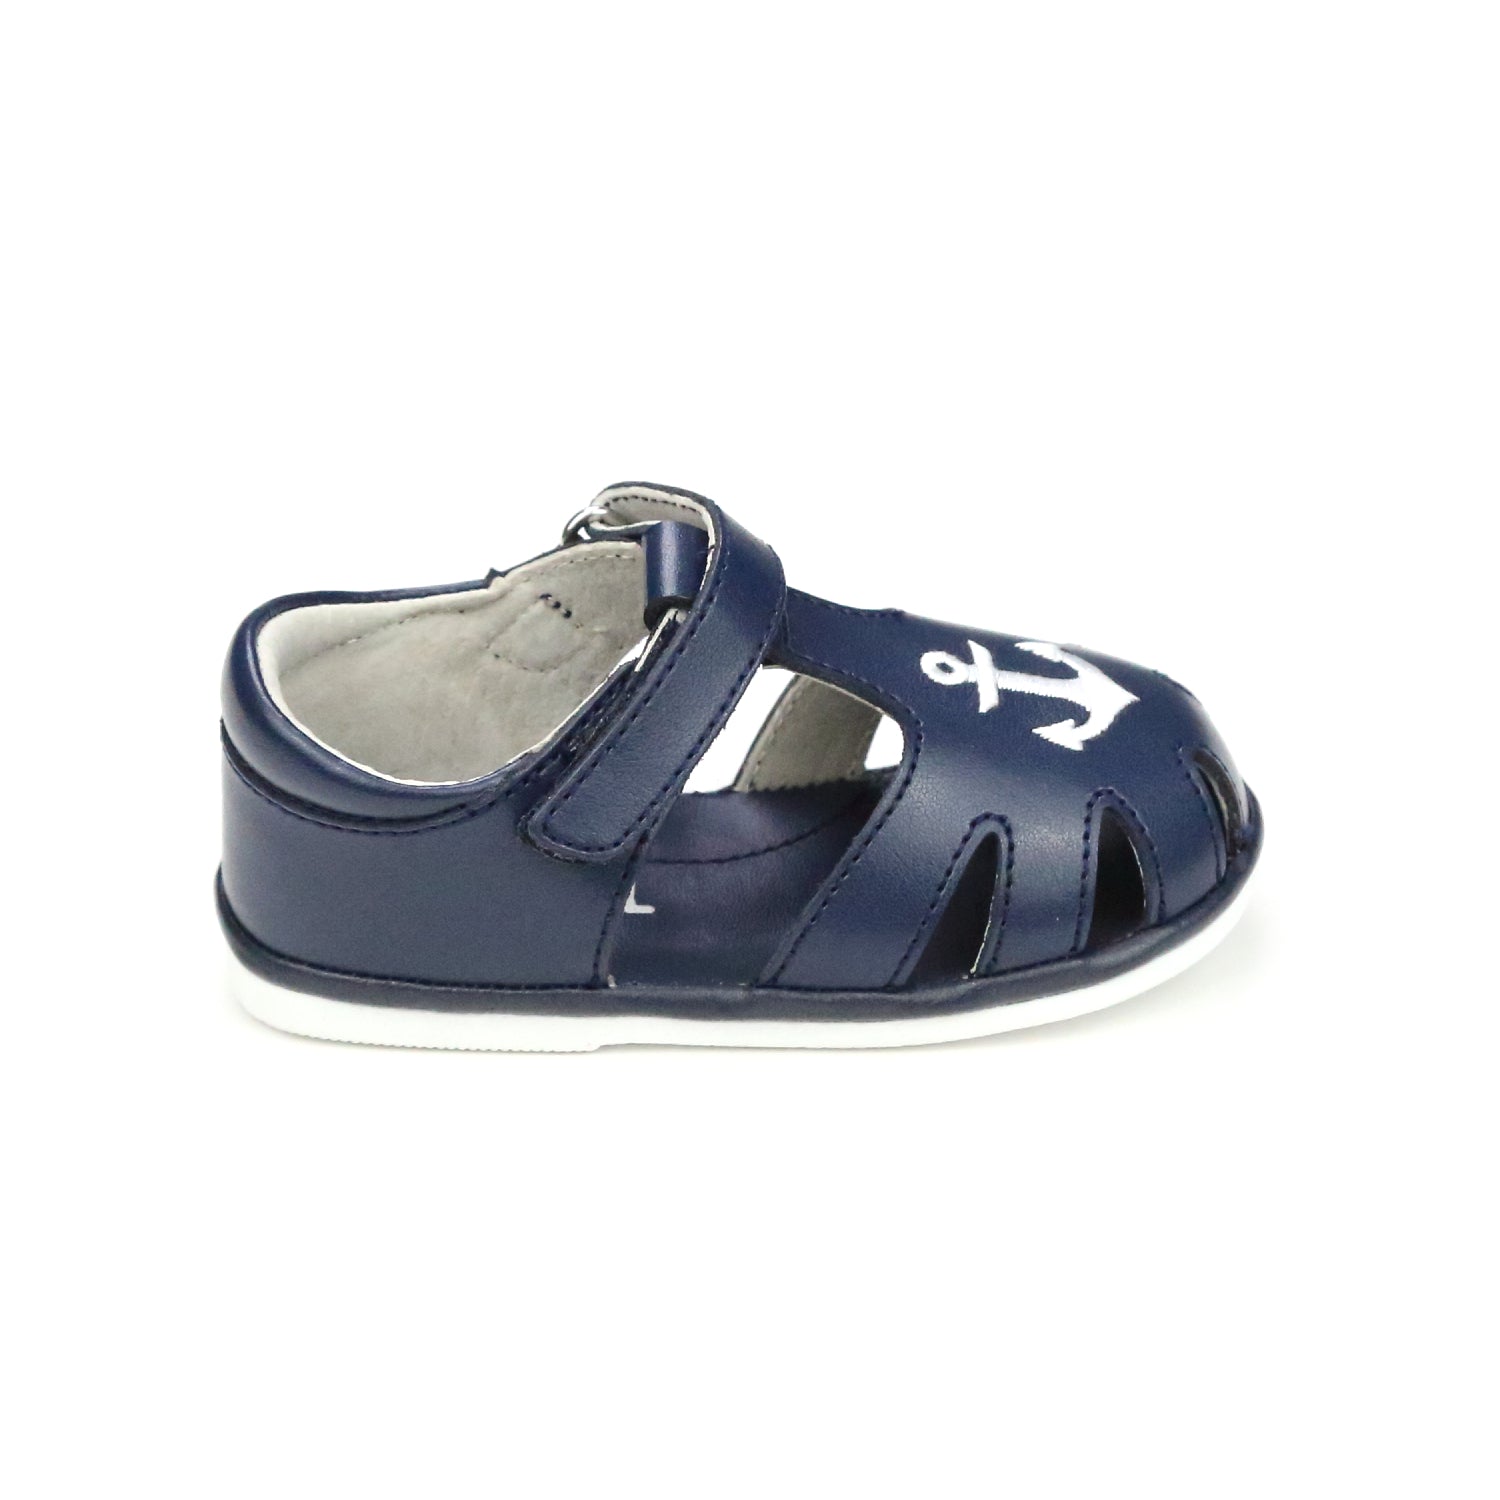 Sawyer Nautical Caged Leather Sandal - Babies & Toddlers